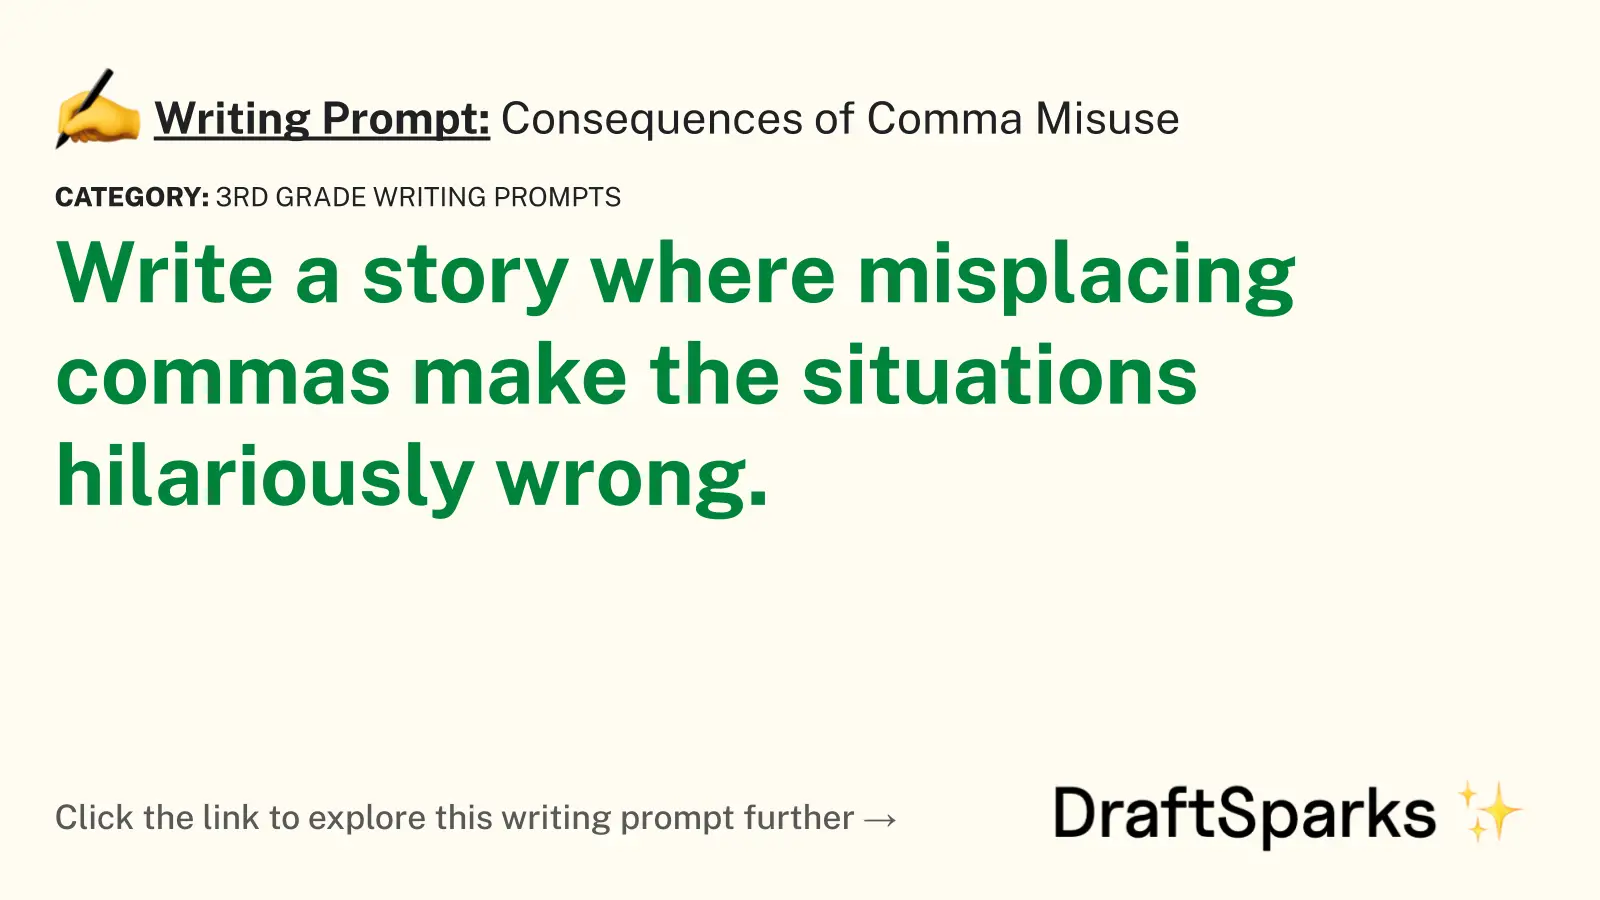 Consequences of Comma Misuse